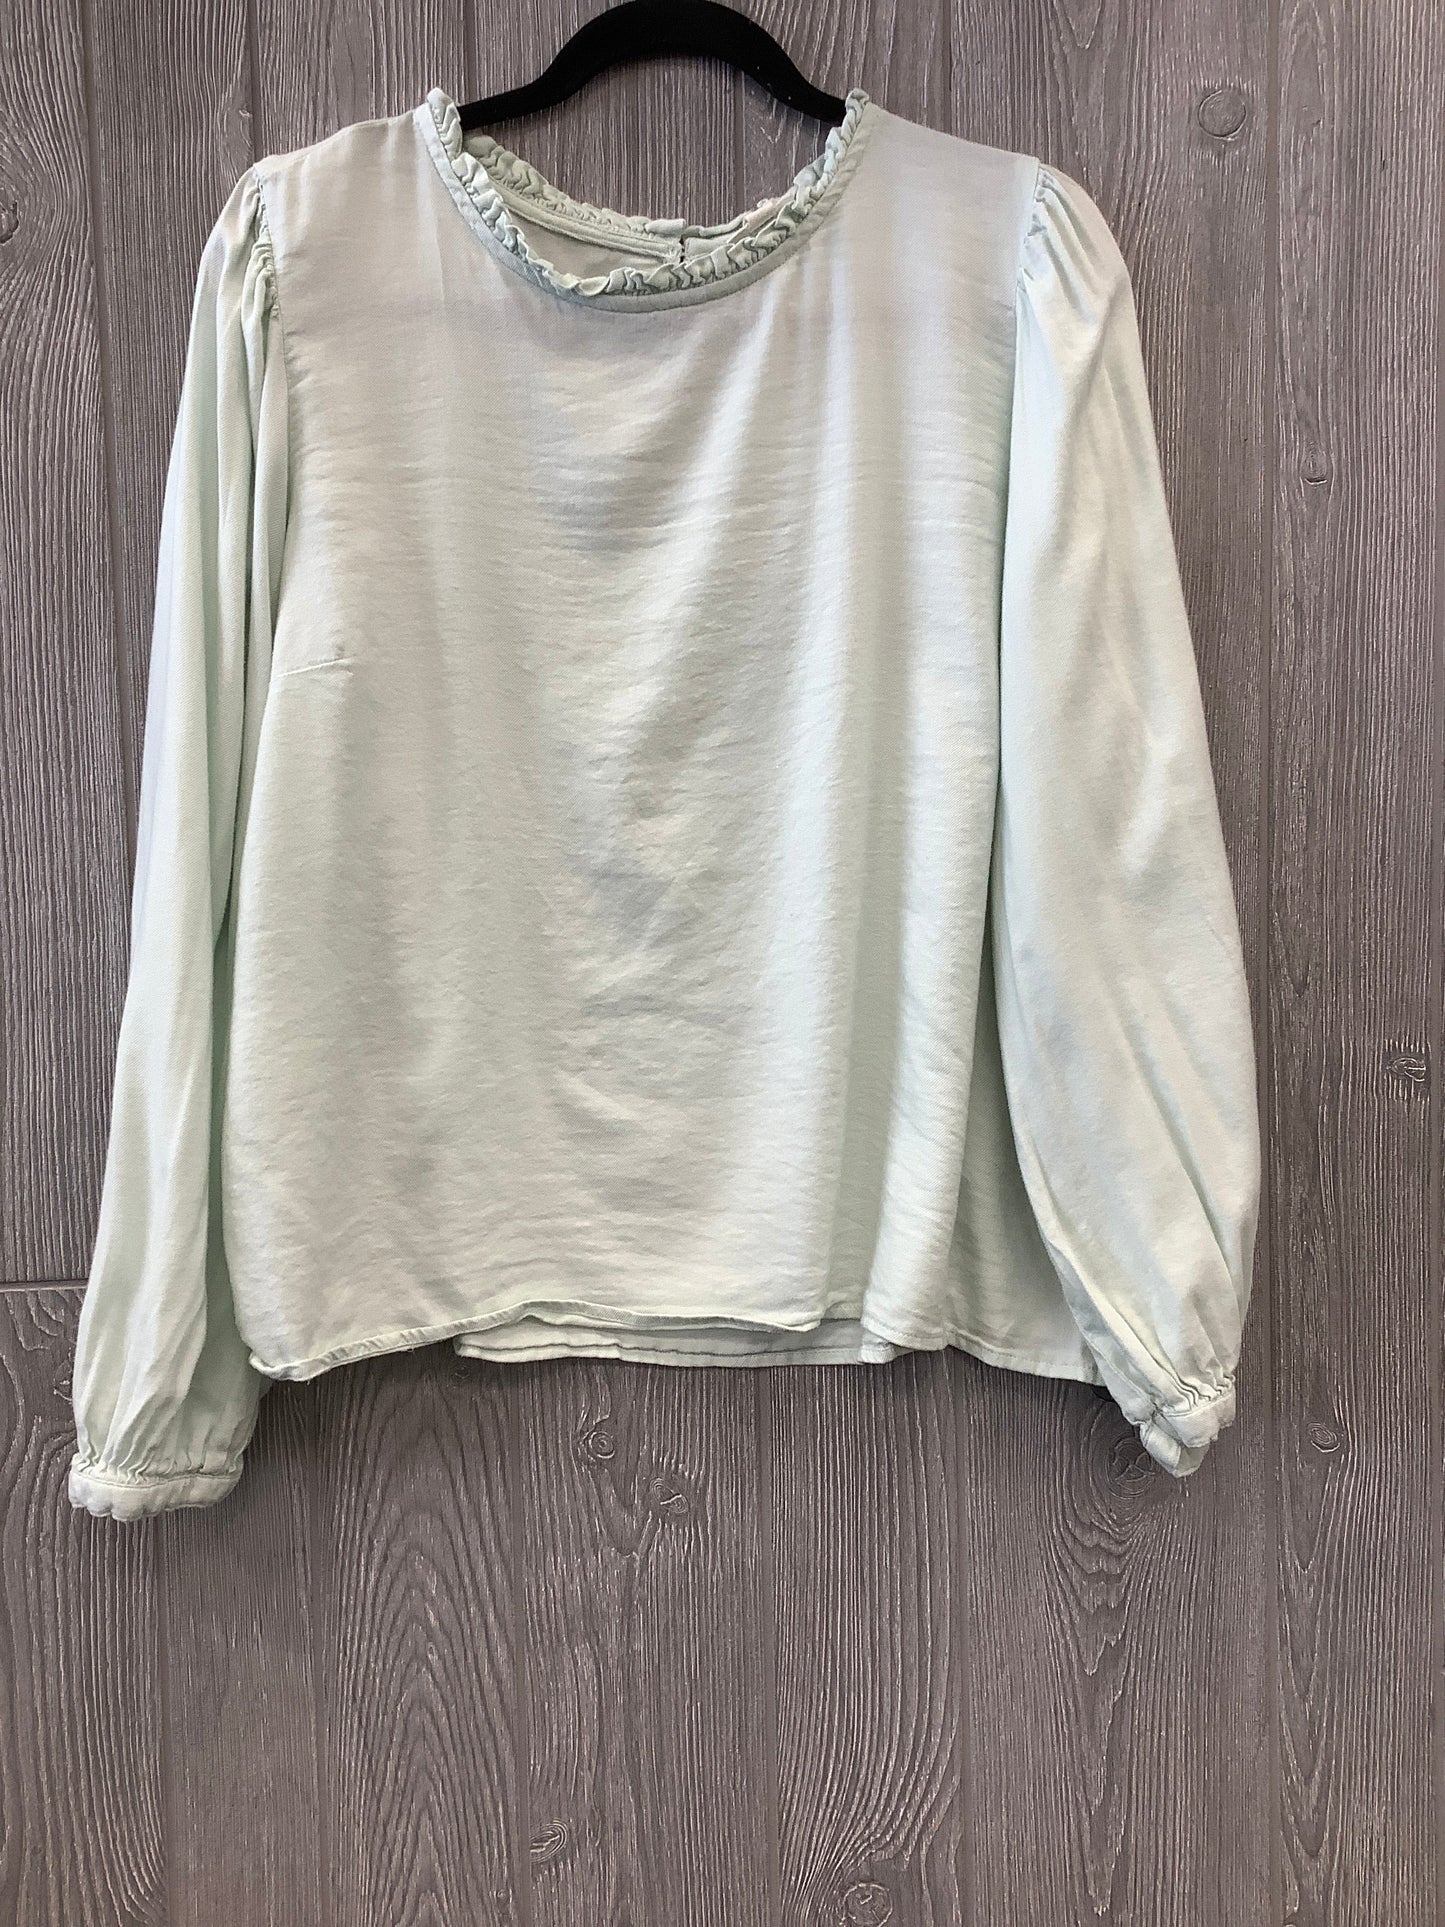 Green Top Long Sleeve Ana, Size L